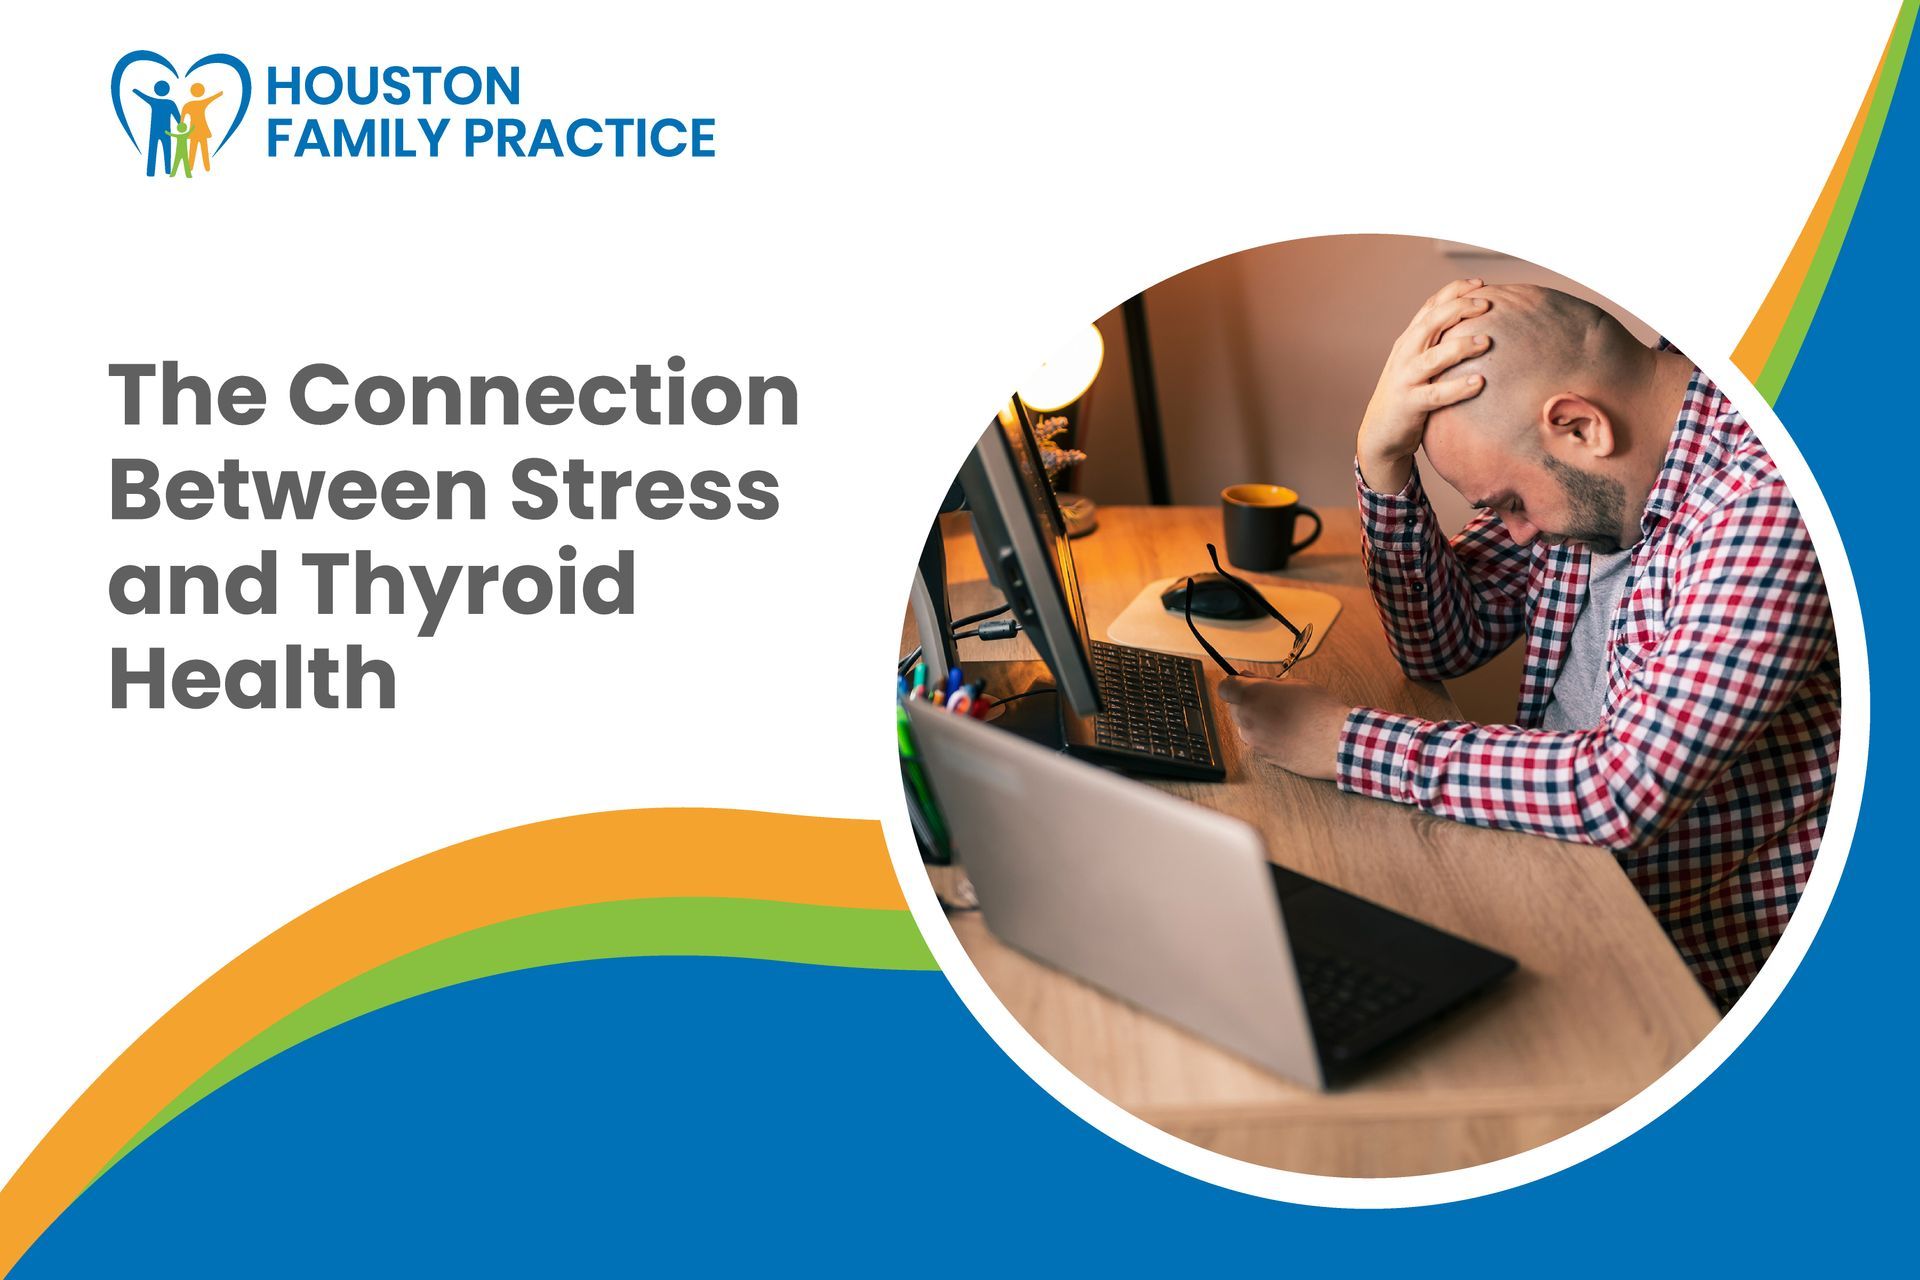 The Connection Between Stress and Thyroid Health